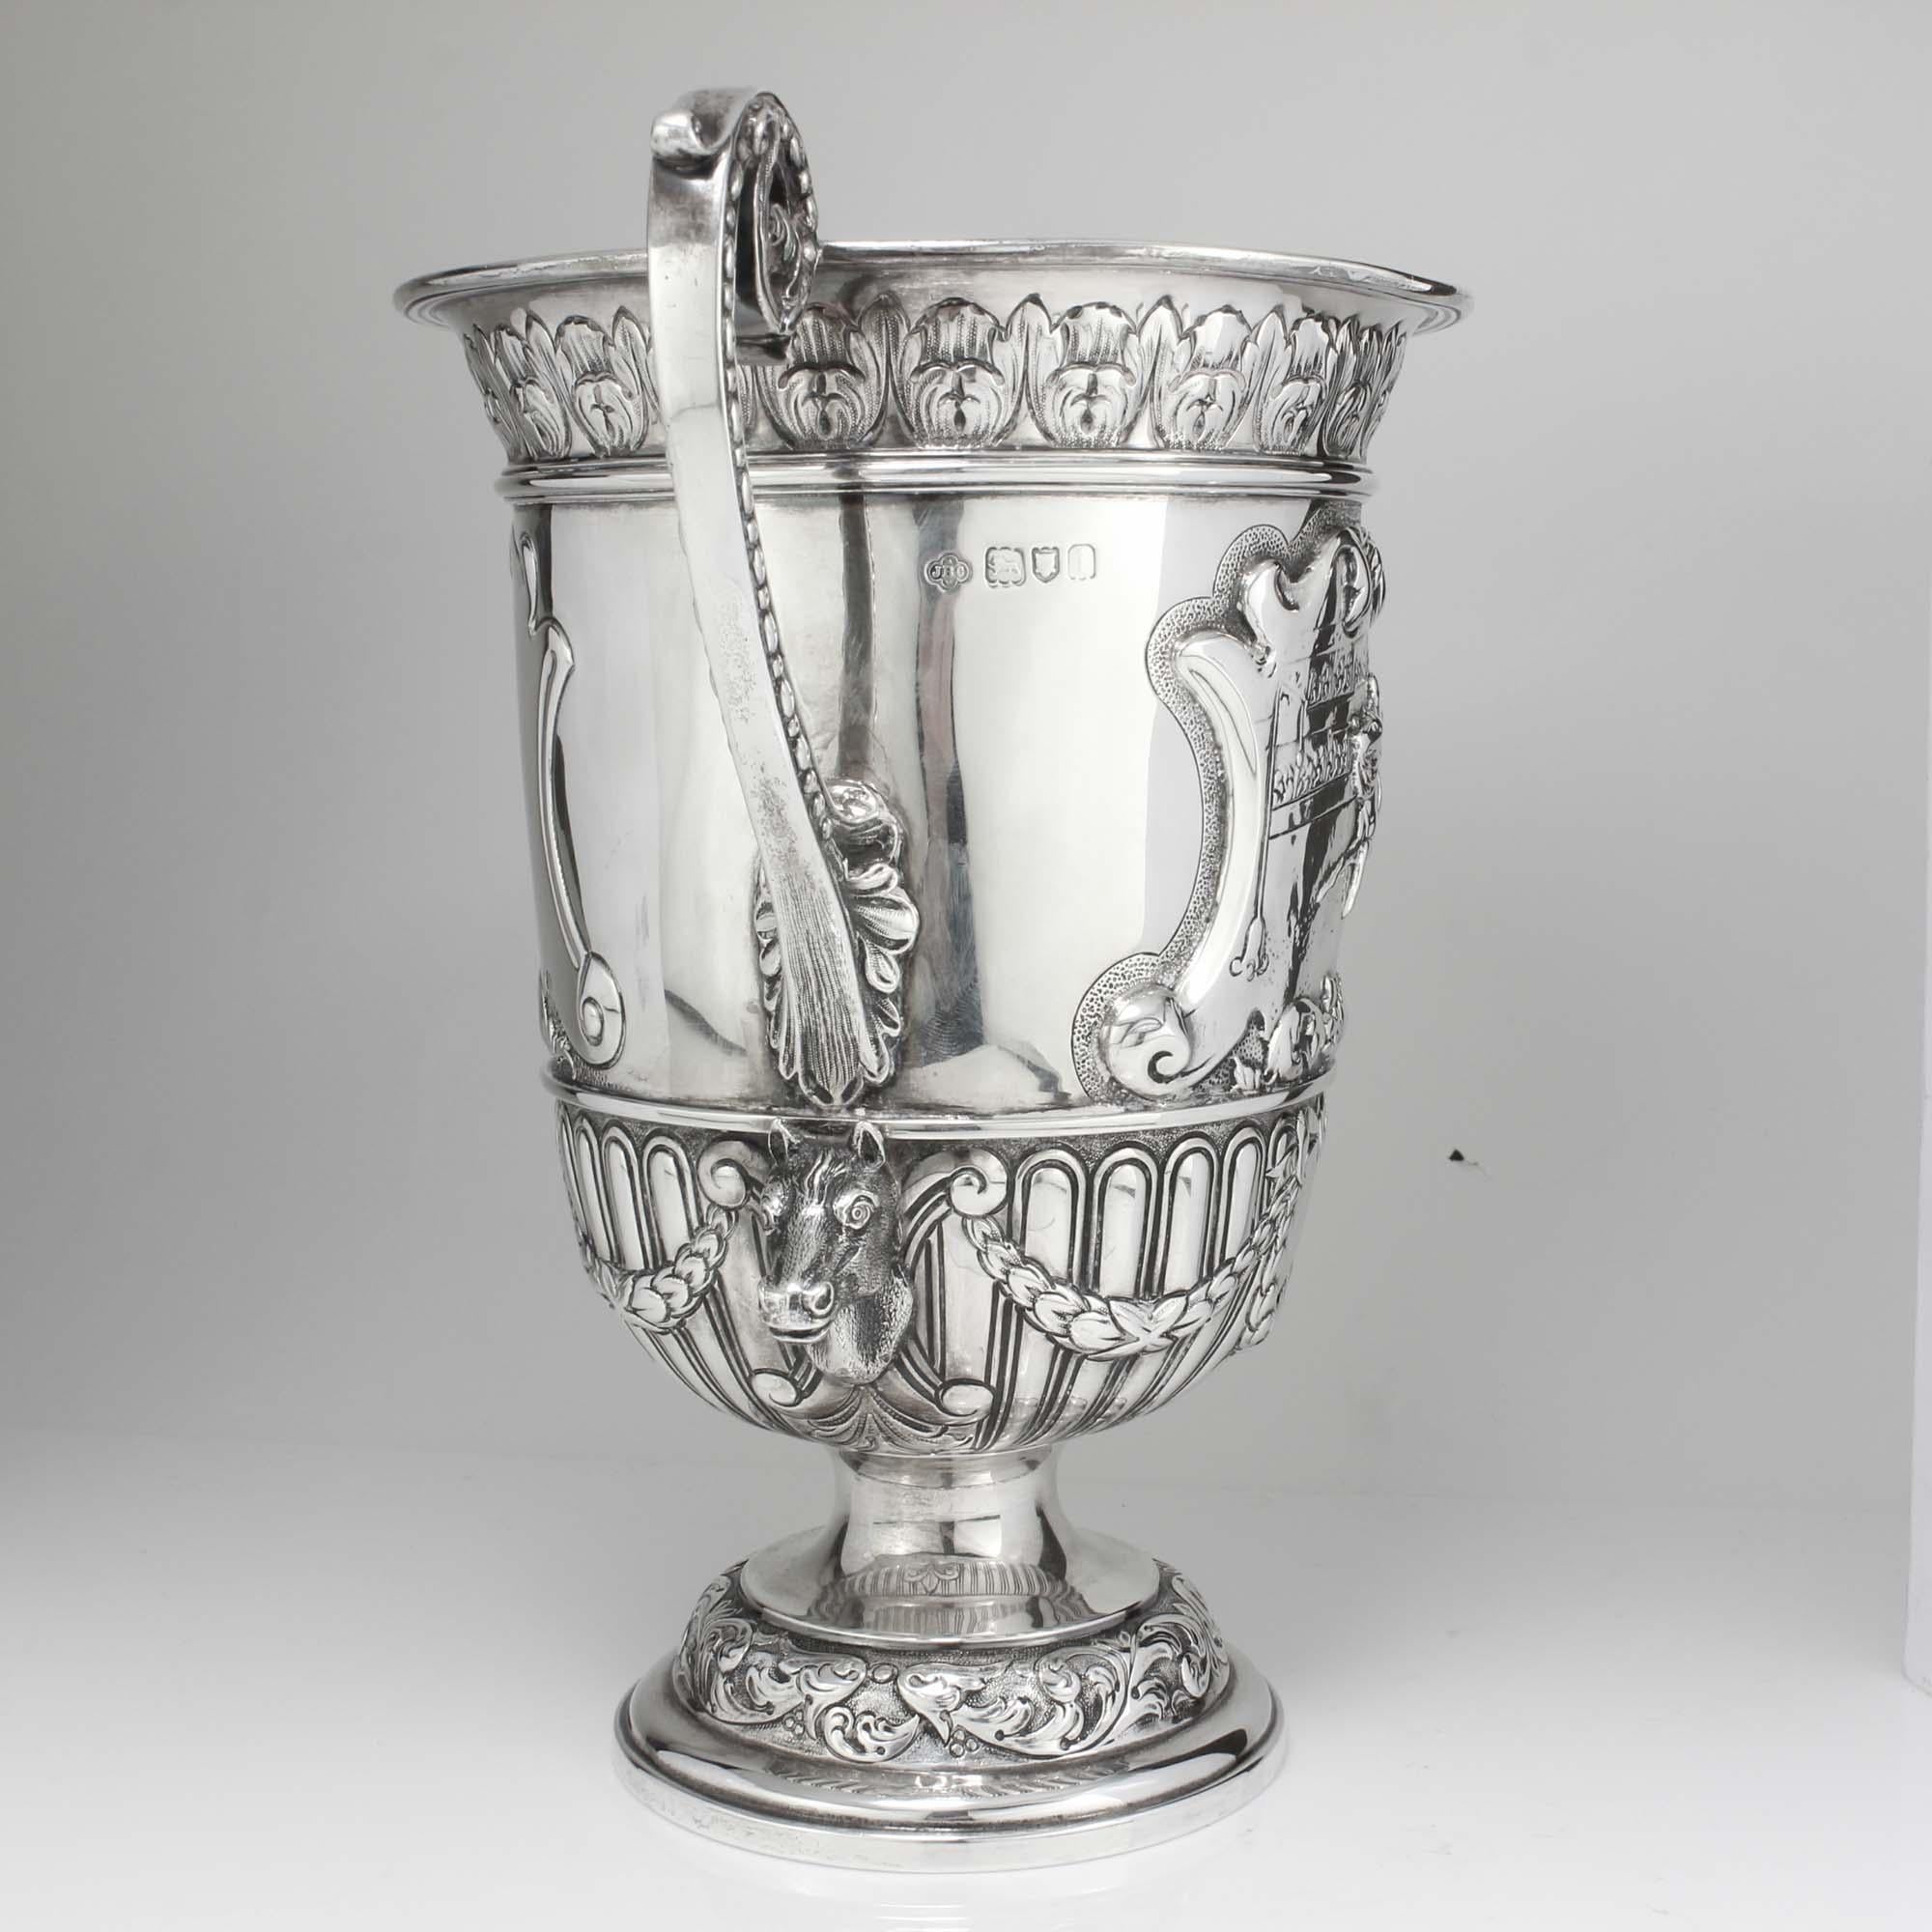 European Antique Edwardian Silver Trophy with Two Handles, London, 1904